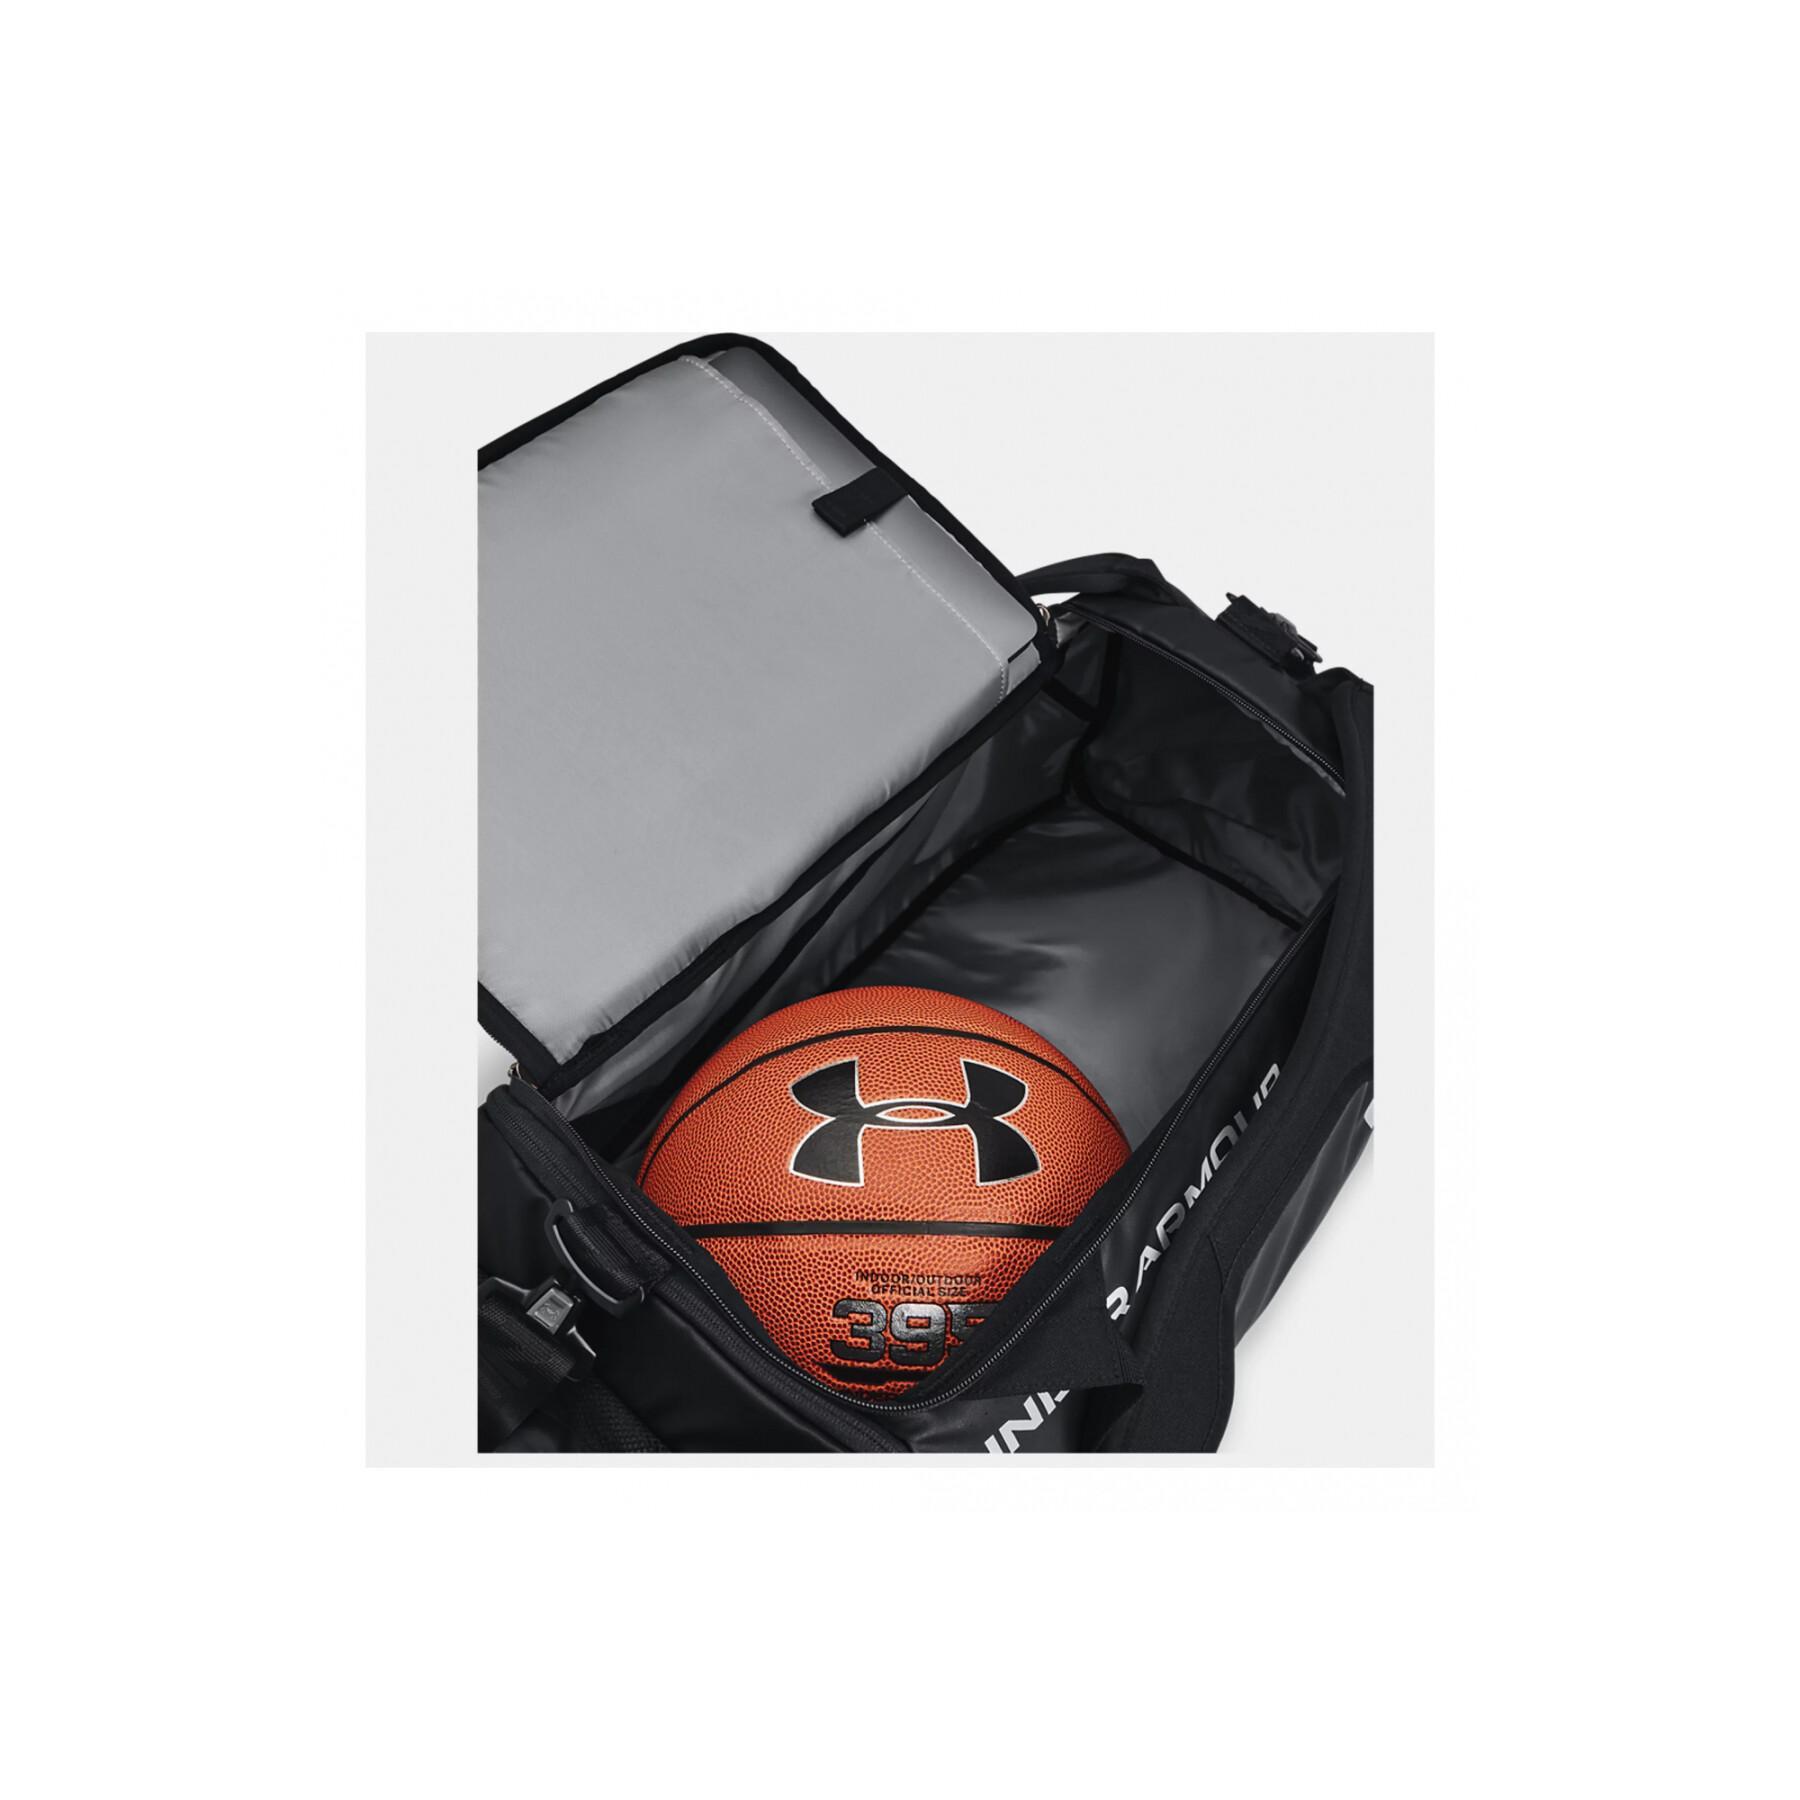 Small sports bag Under Armour double compartiment